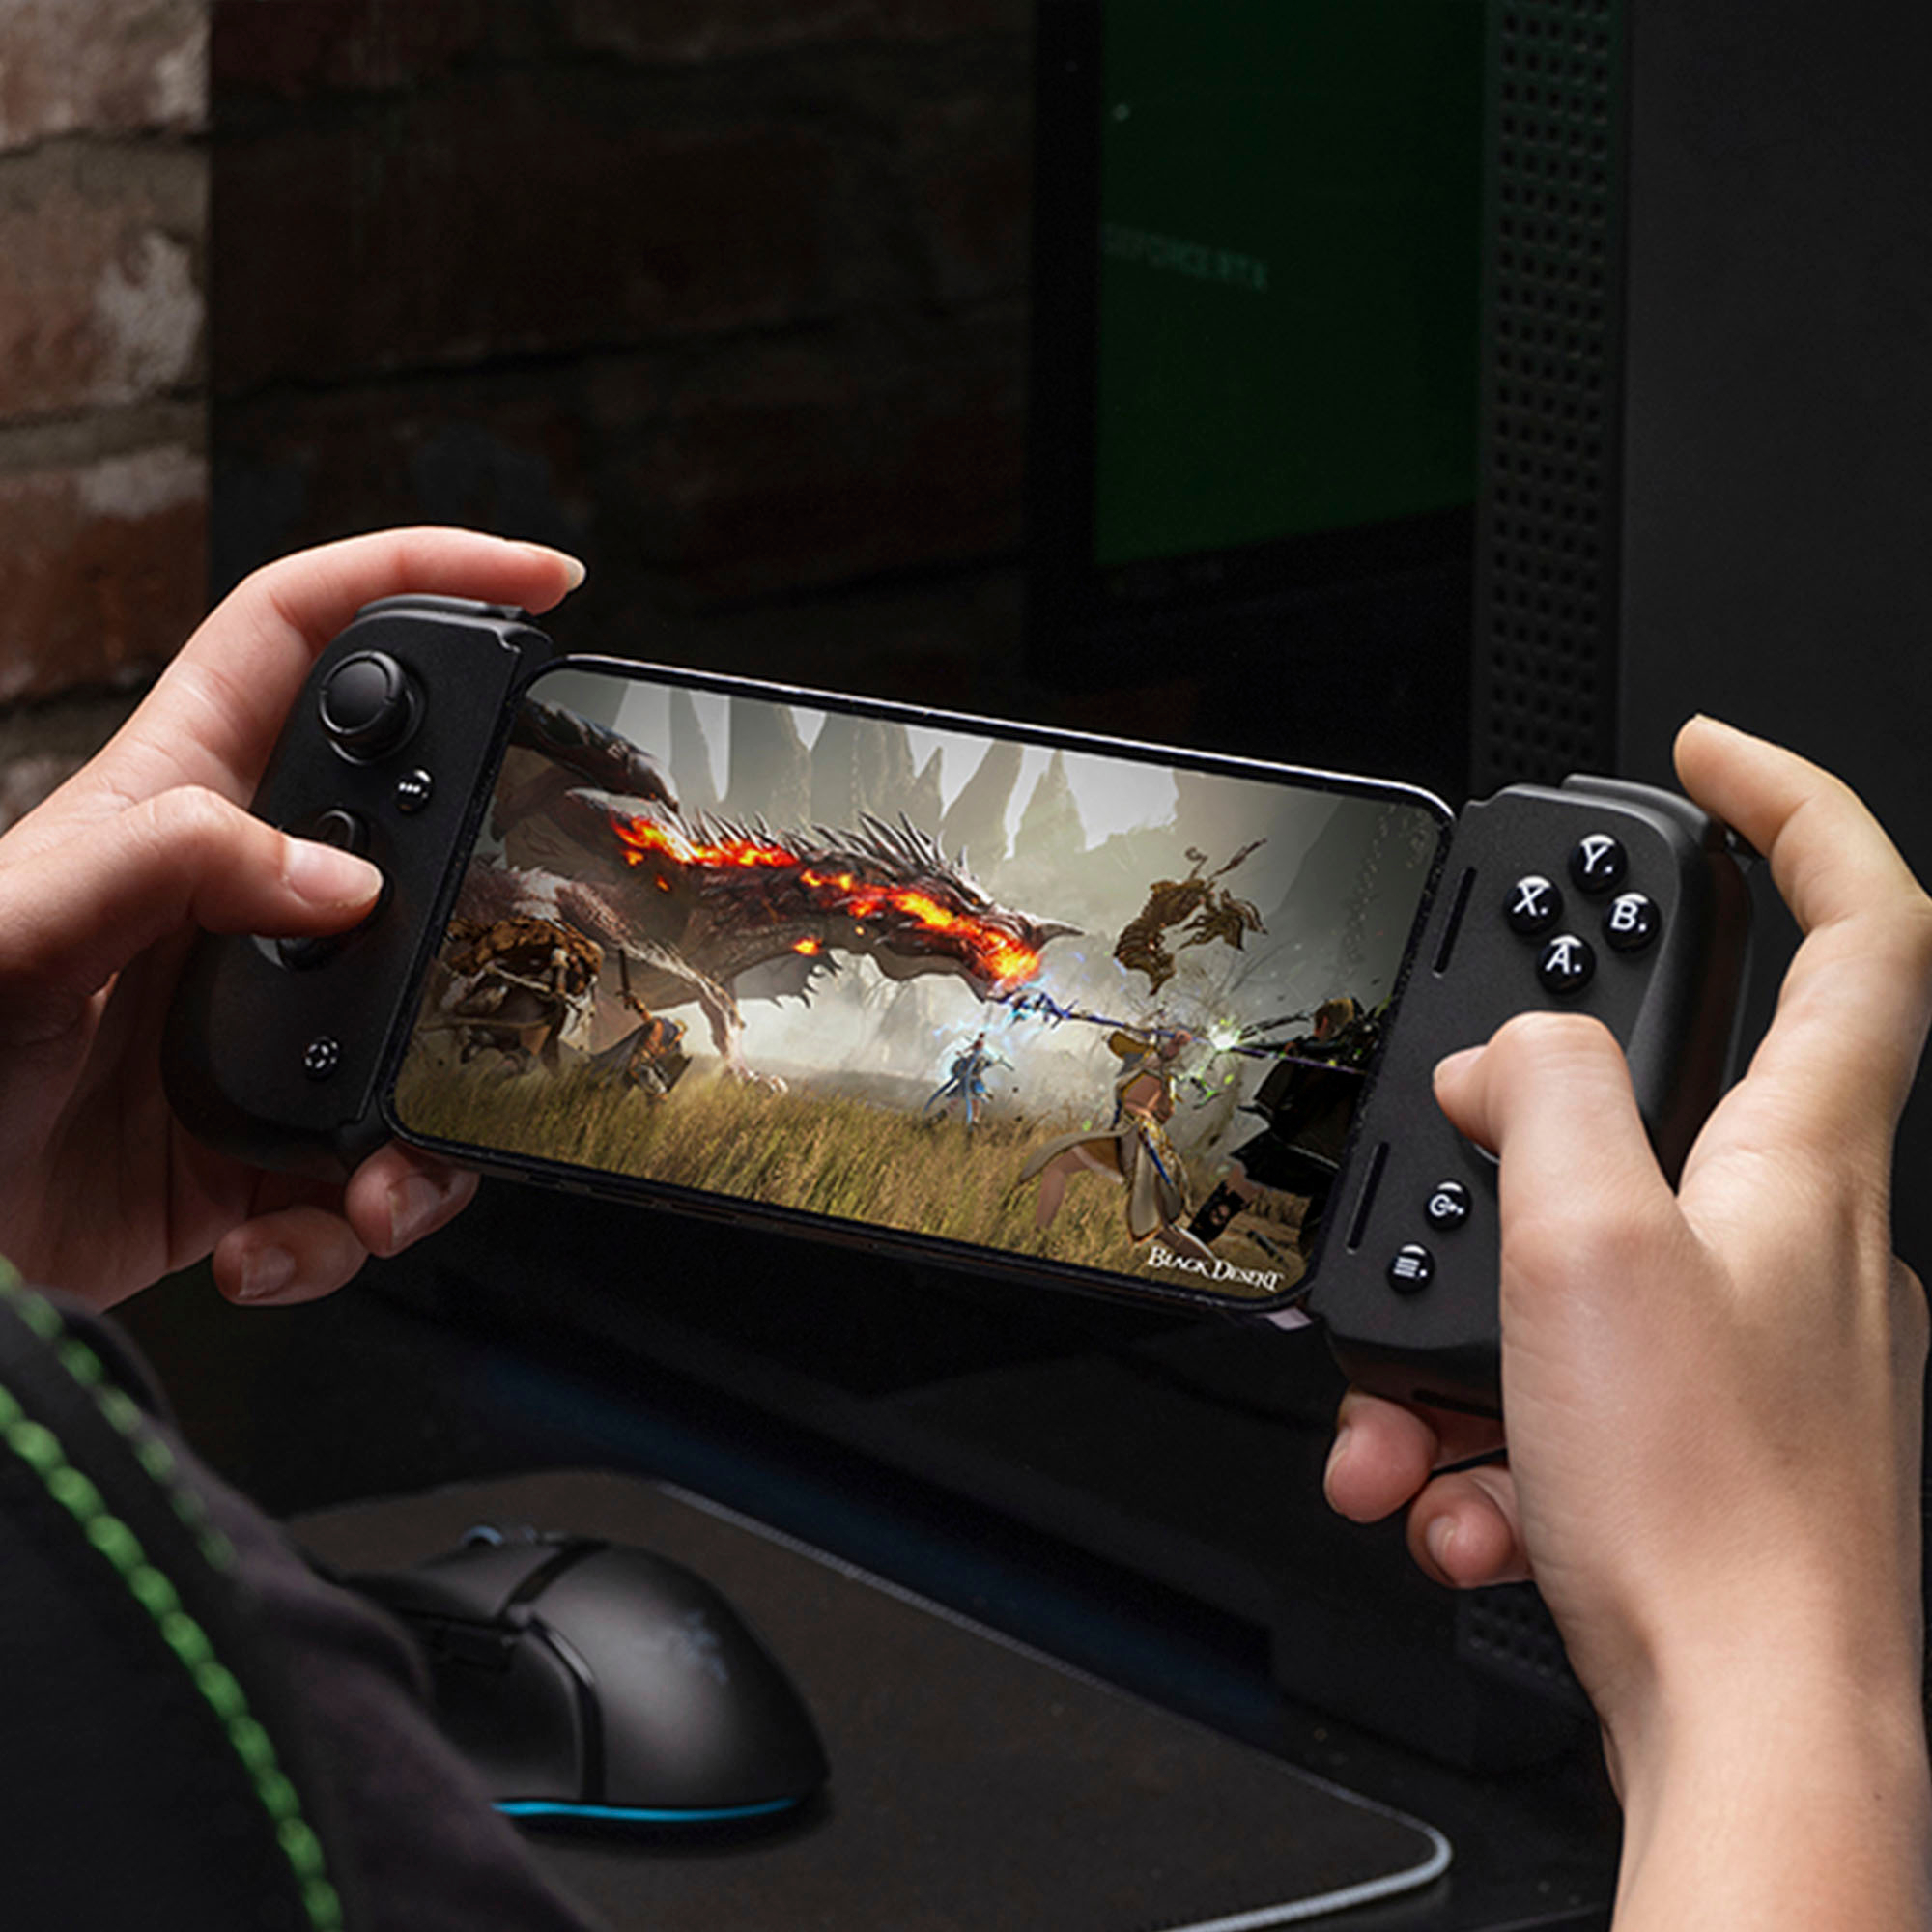 Razer Kishi V2 review: Contender for best iPhone game controller - iPhone  Discussions on AppleInsider Forums